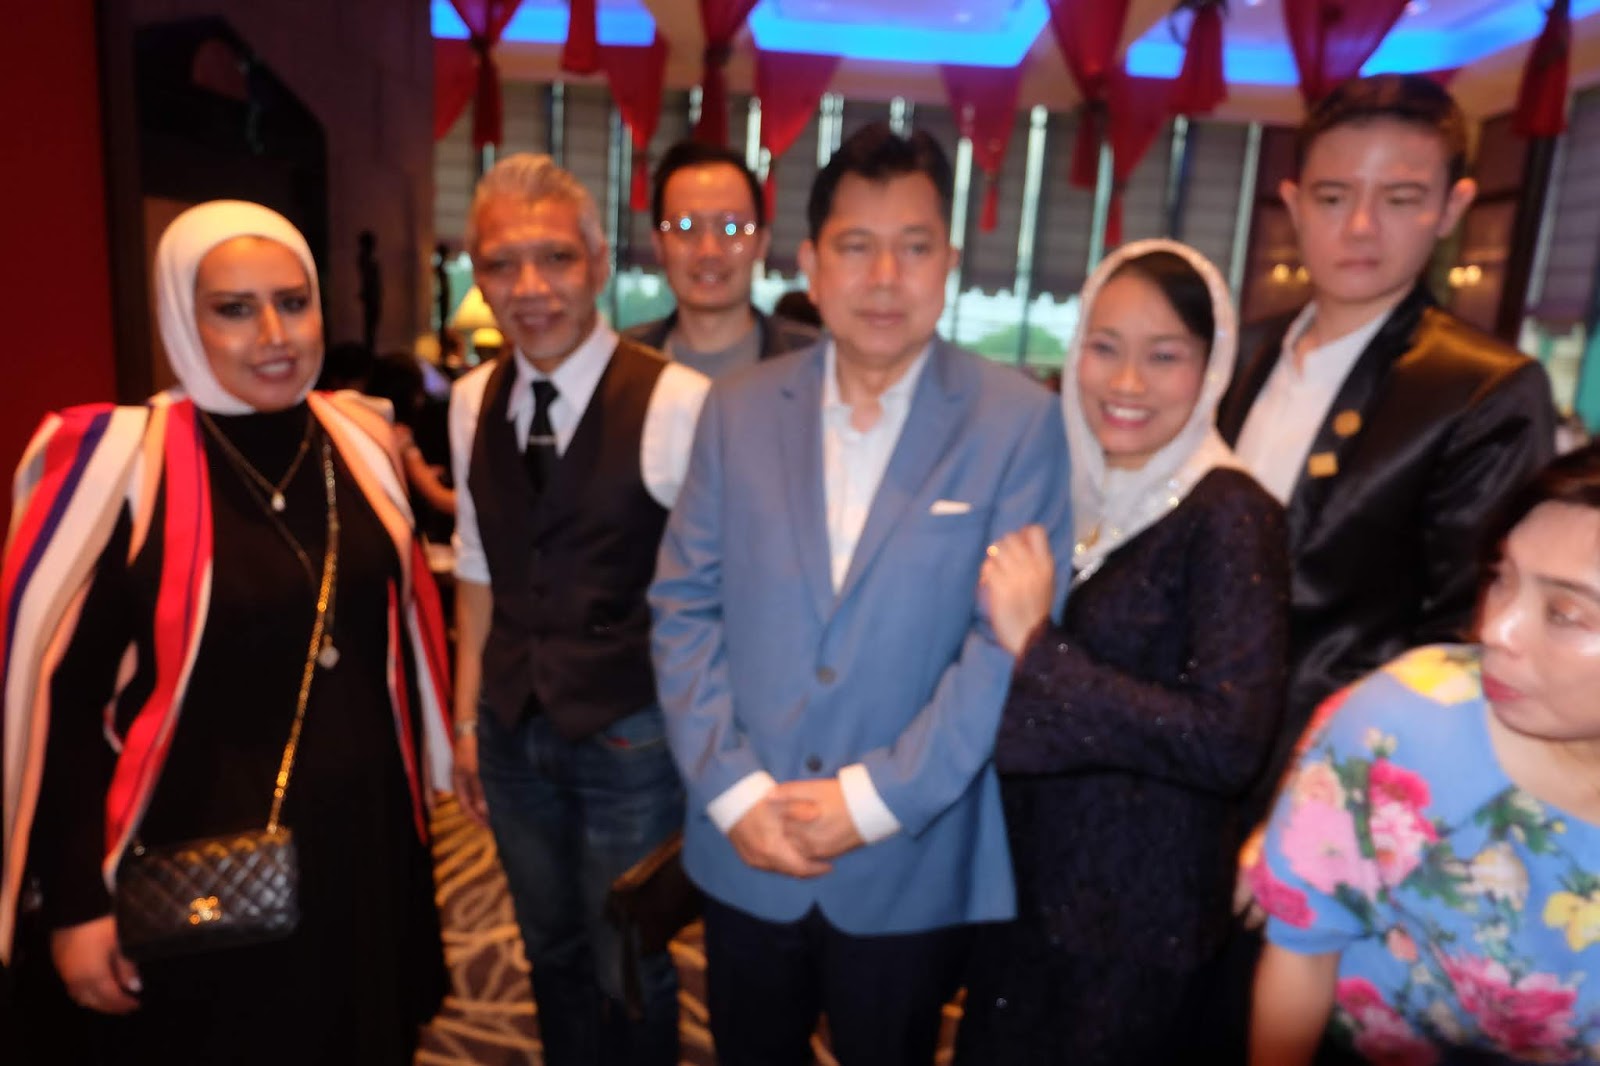 Kee Hua Chee Live!: PUAN SRI SUSAN CHEAH AND DATO SRI EDMUND GOH HOSTED ...